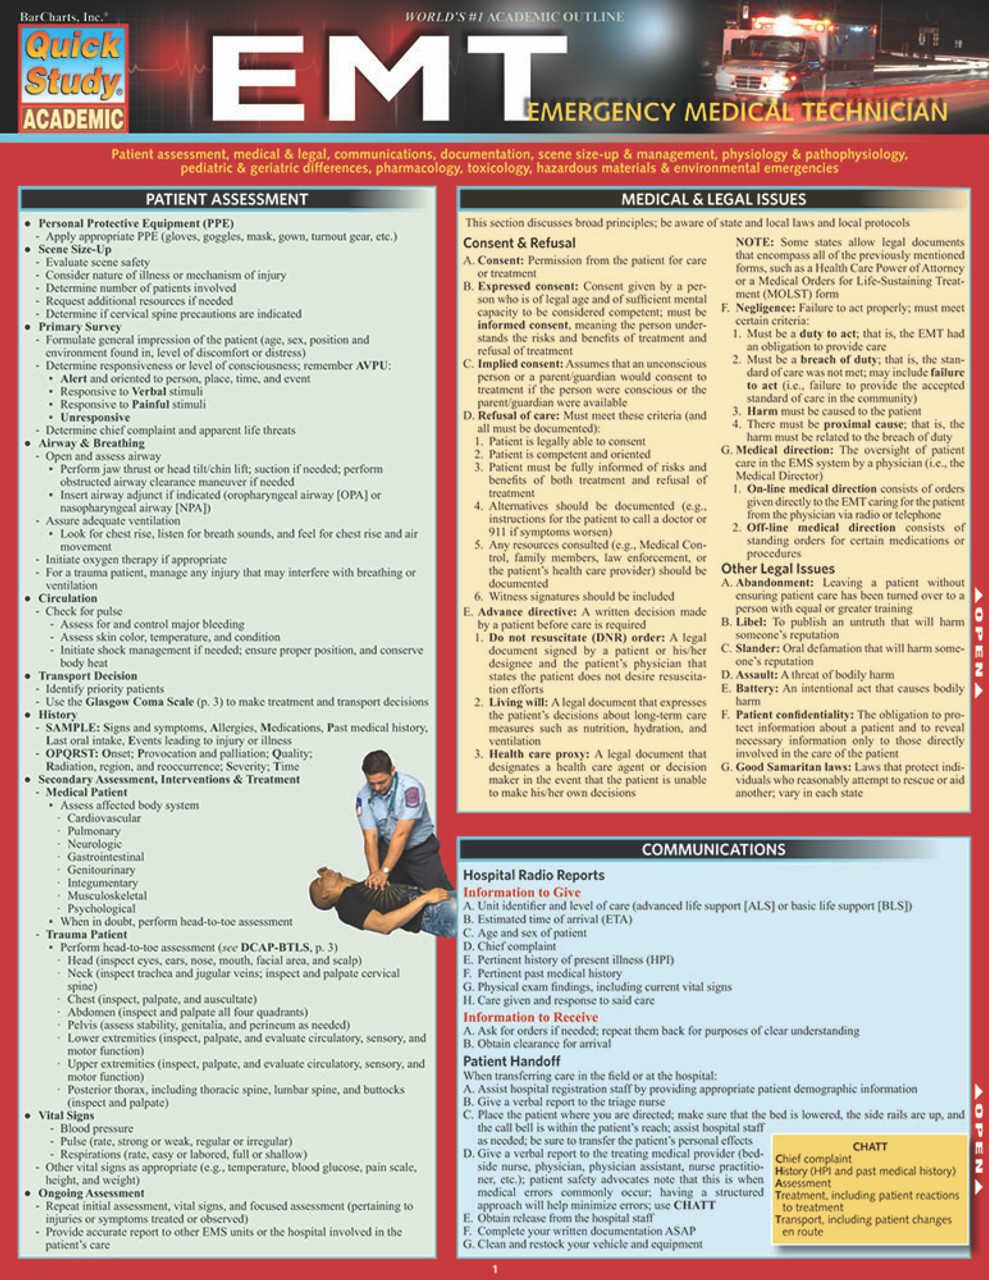 Paramedic: A Quickstudy Laminated Reference Guide: 9781423244219